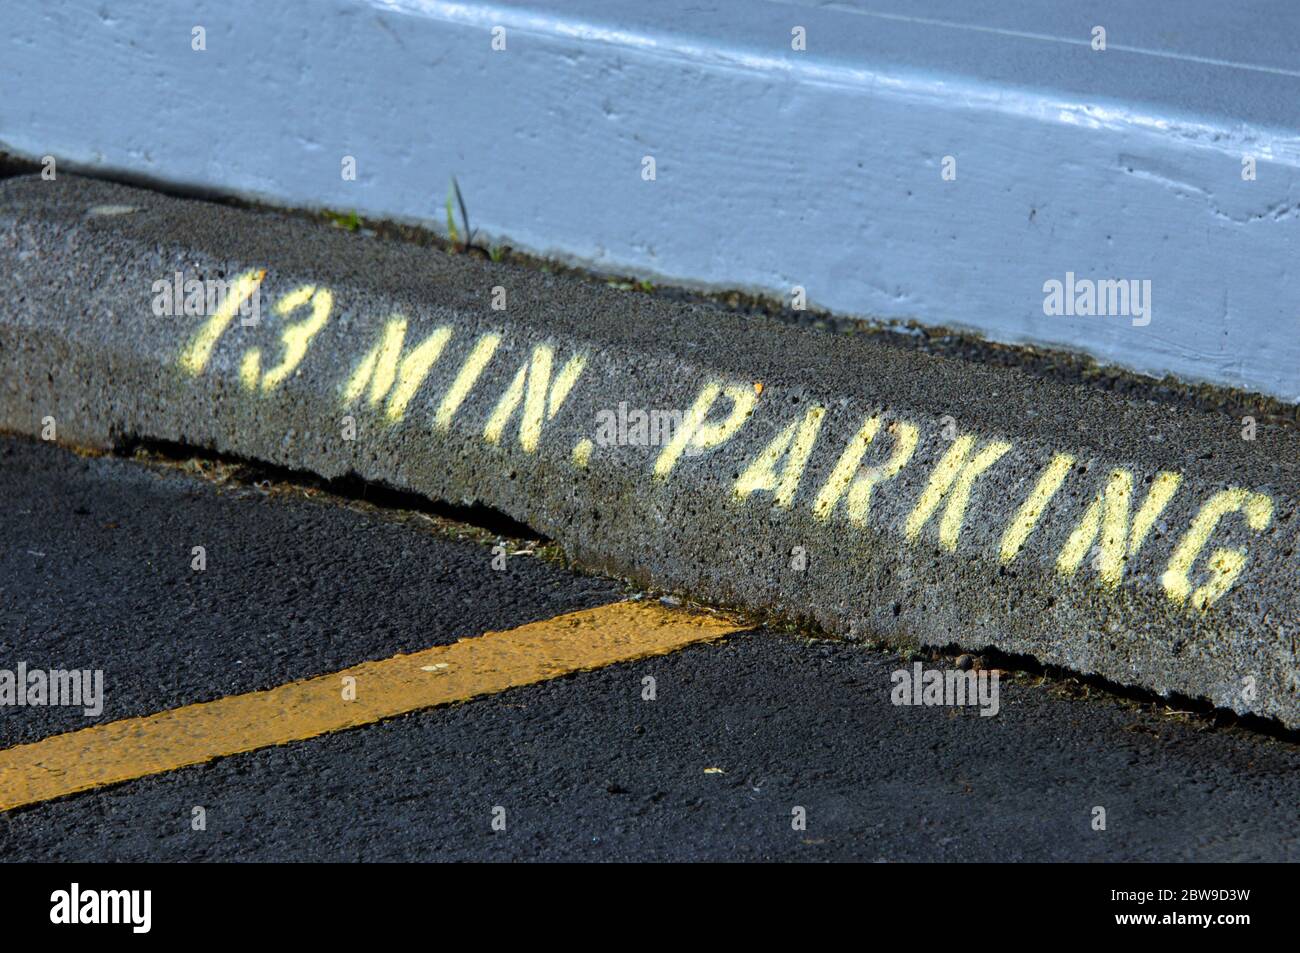 Unusual, and random, time limits parking to 13 minutes.  Concrete curb has stenciled lettering and numbers in yellow spray paint. Stock Photo